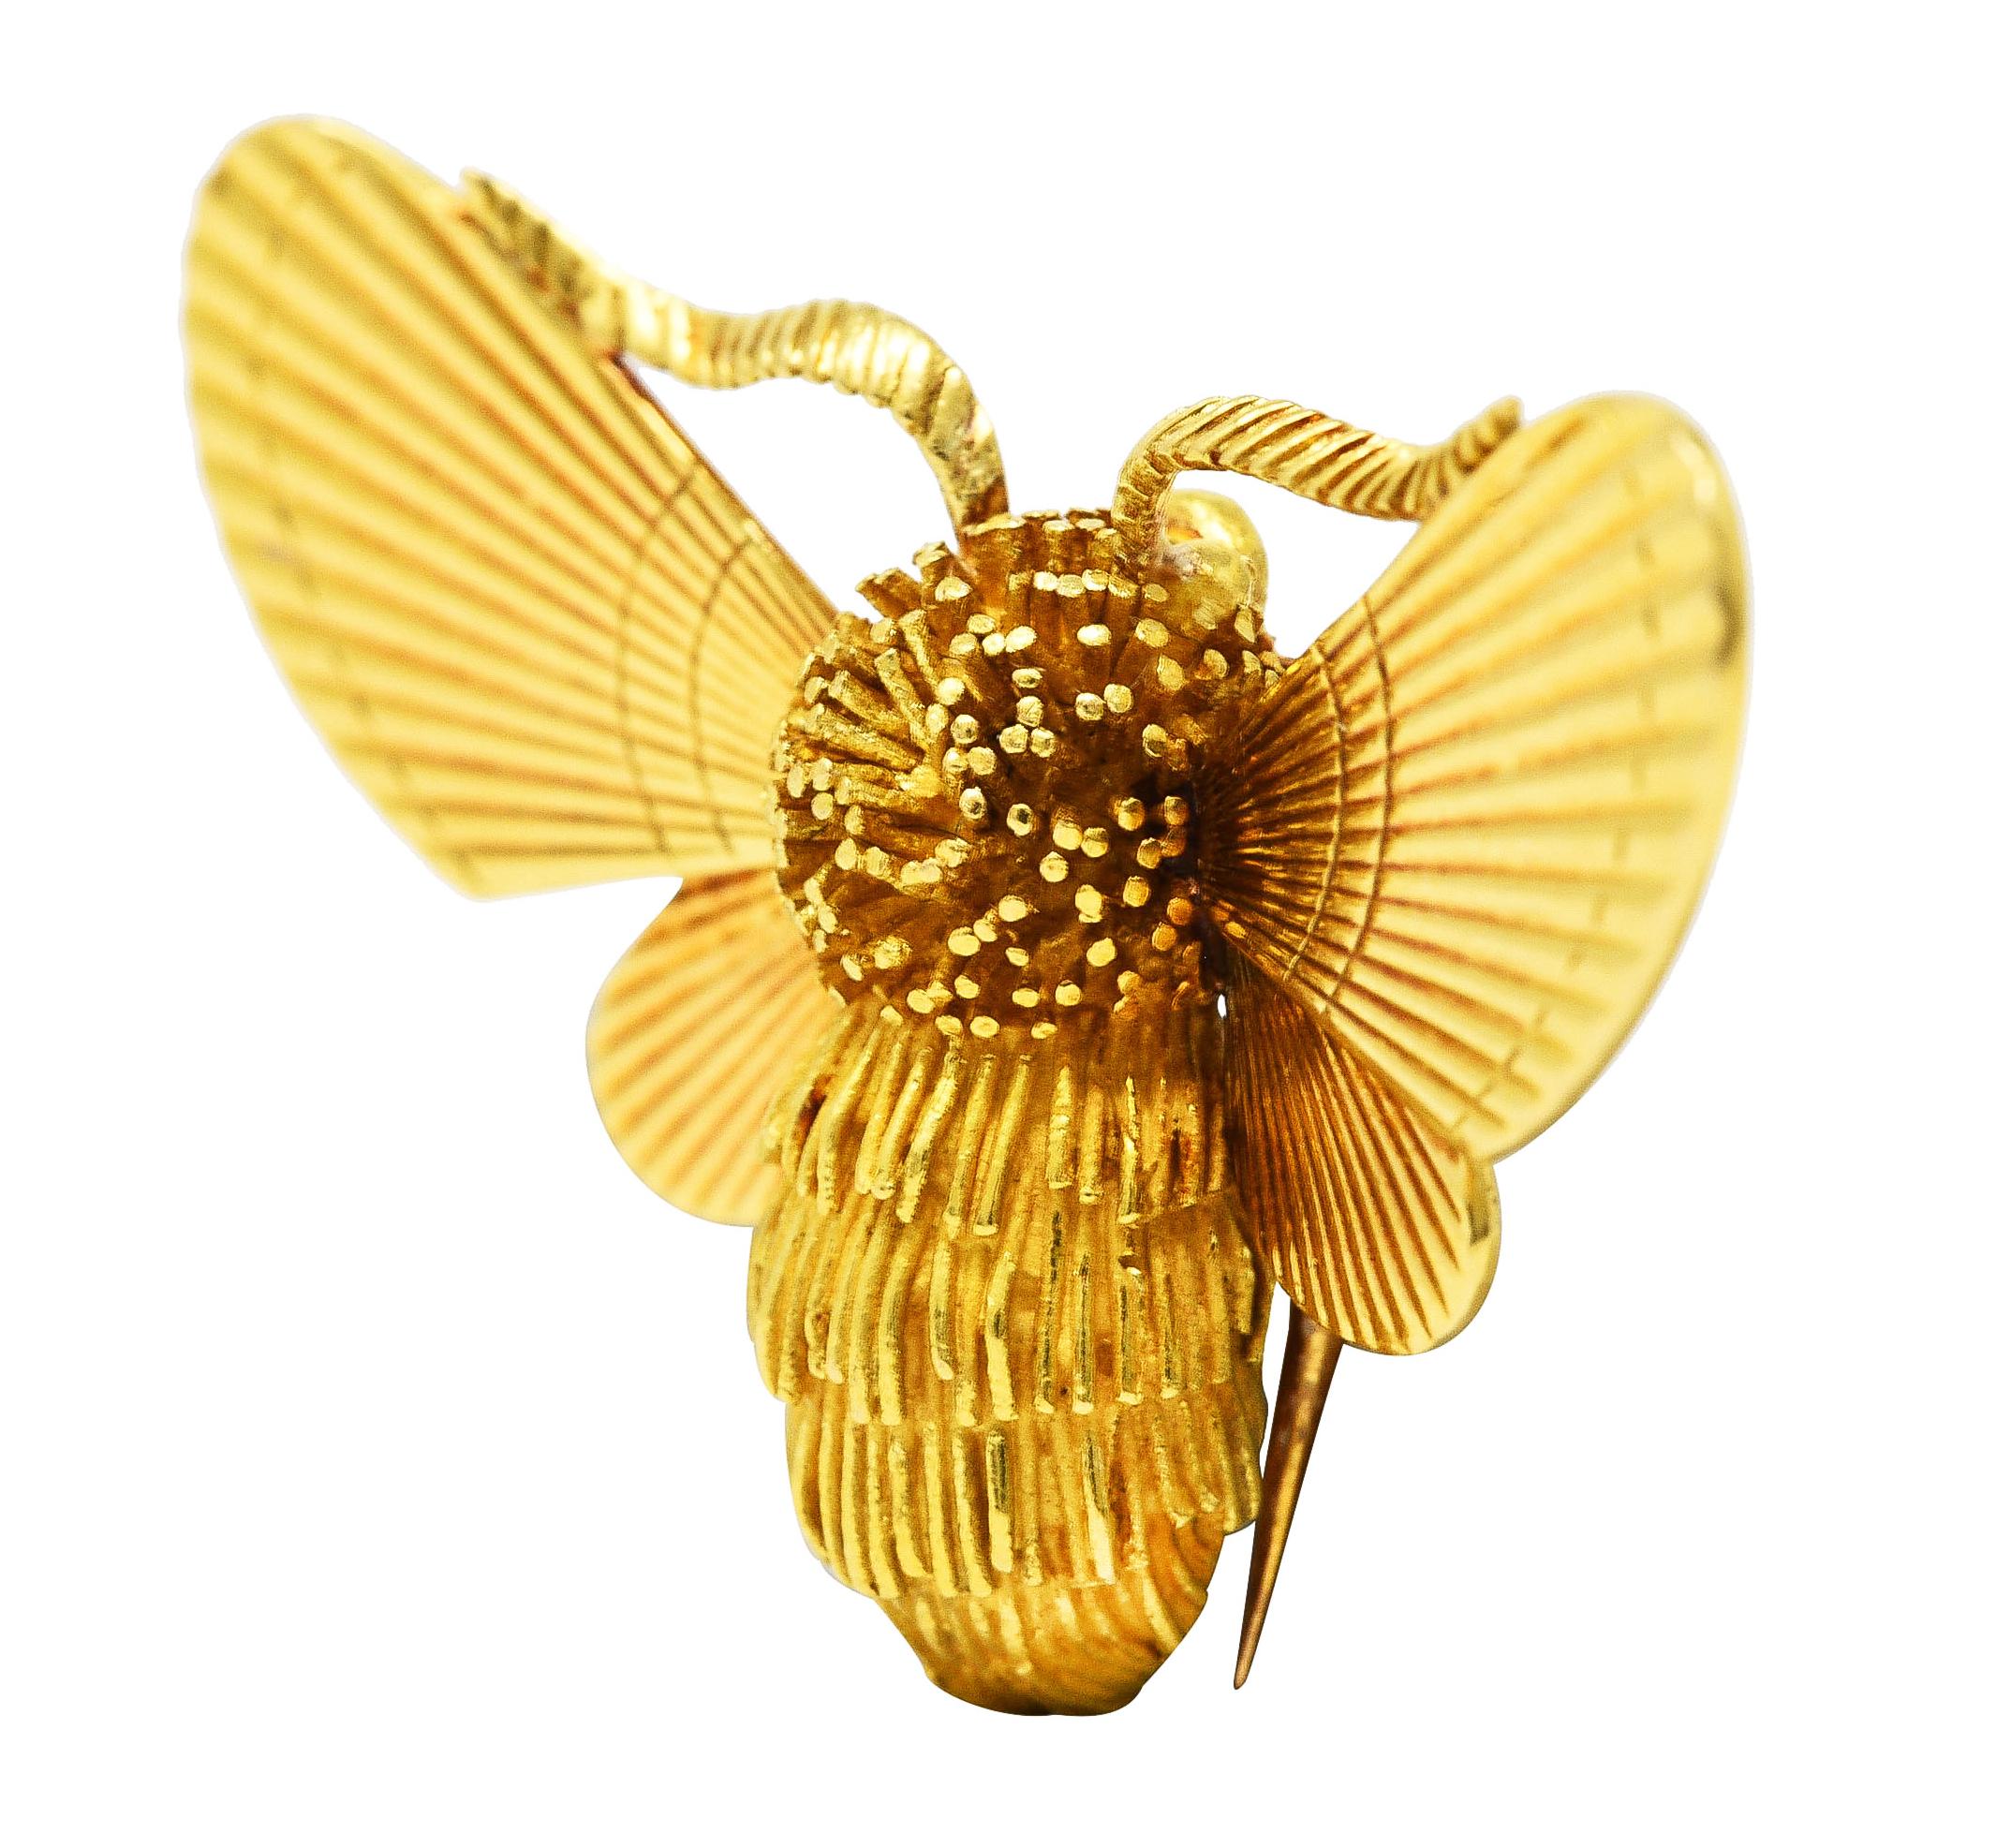 Designed as a highly stylized bumble bee with ridged fur layers on body and stippled head. Featuring fanning wings with engraved linear pattern throughout. Accented by wavy antennae with engraved texture. Completed by hinged double pin stem with